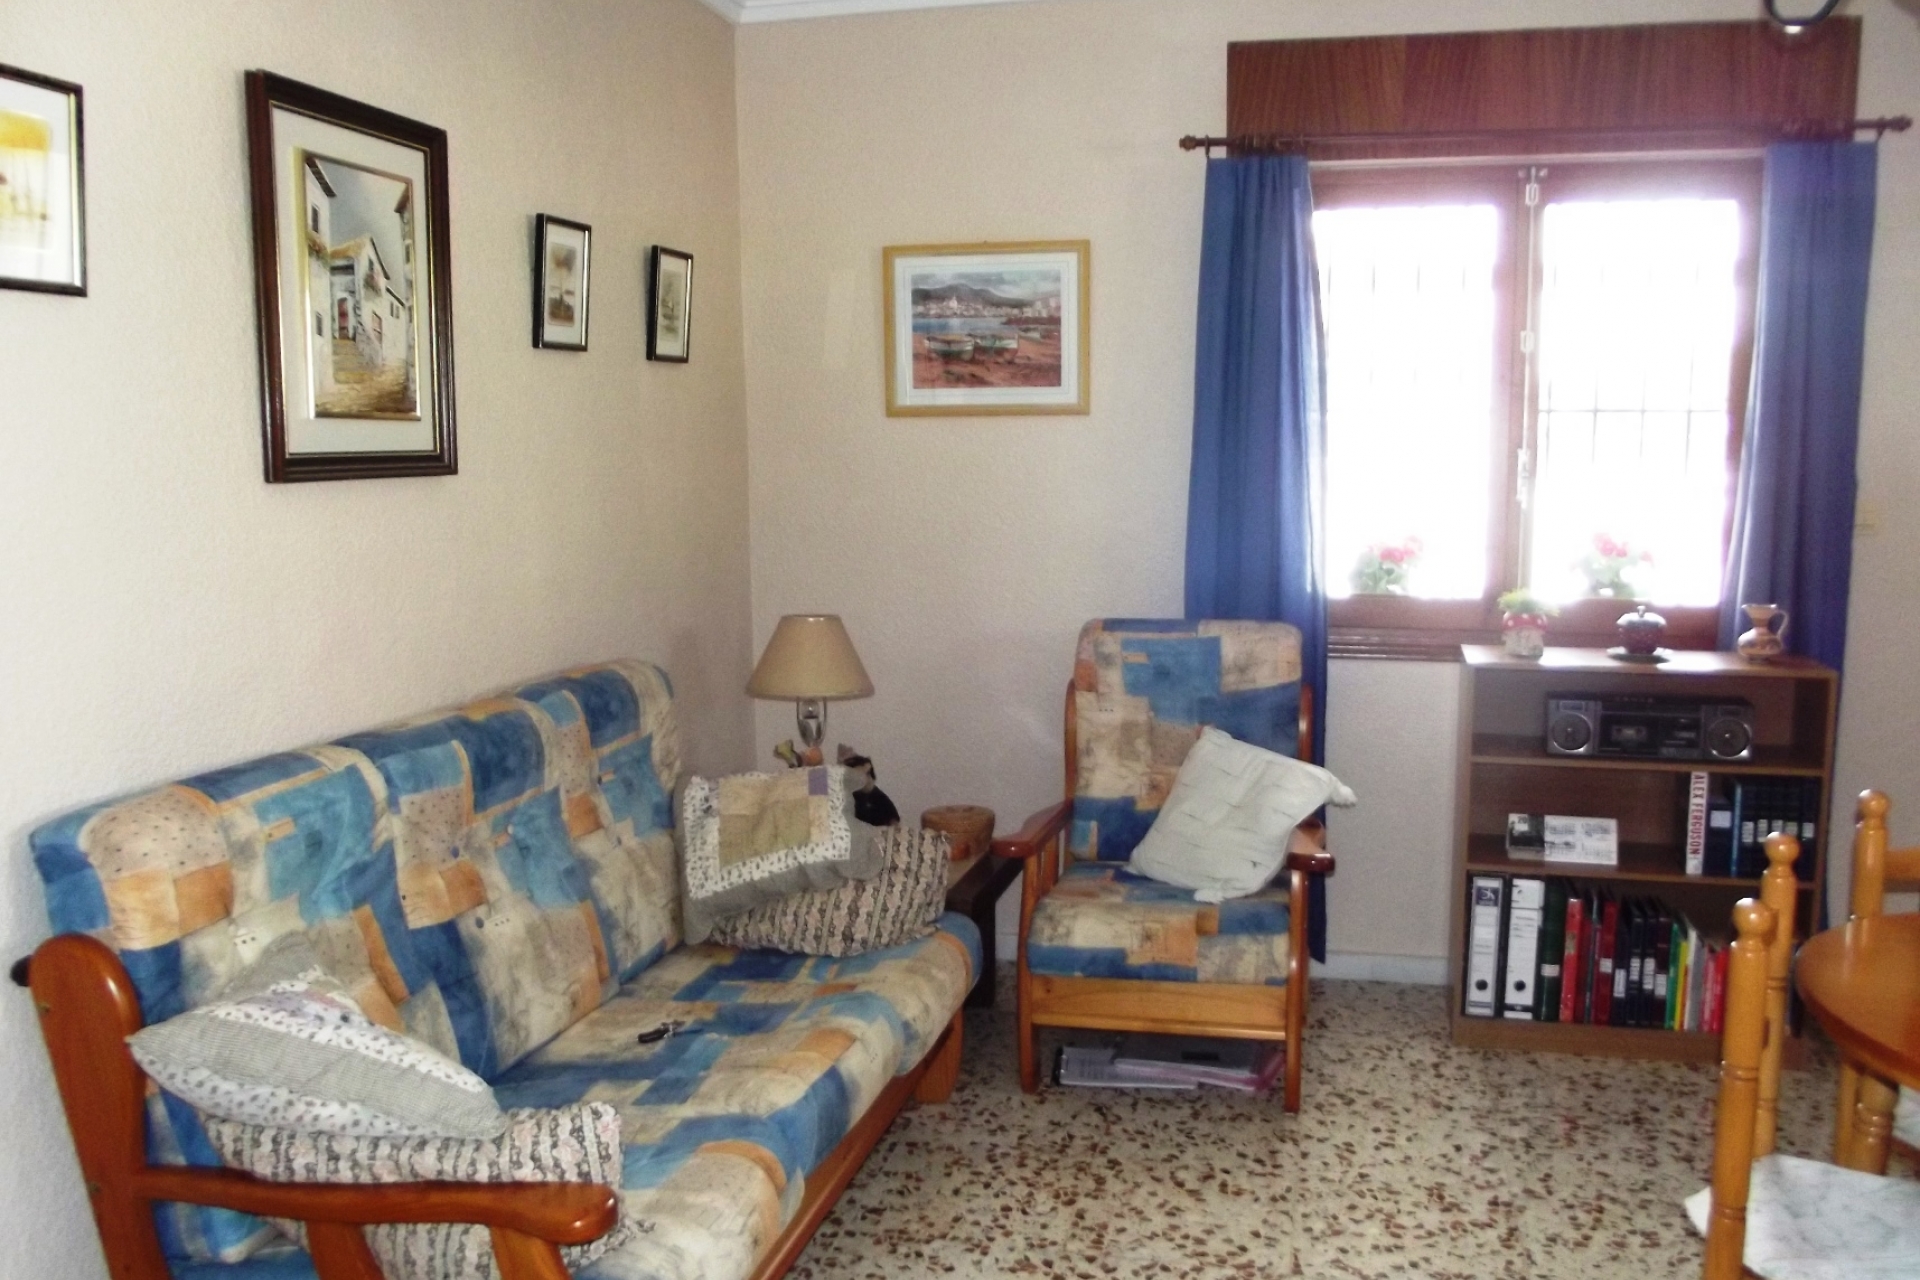 Property on Hold - Bungalow for sale - Torrevieja - La Siesta